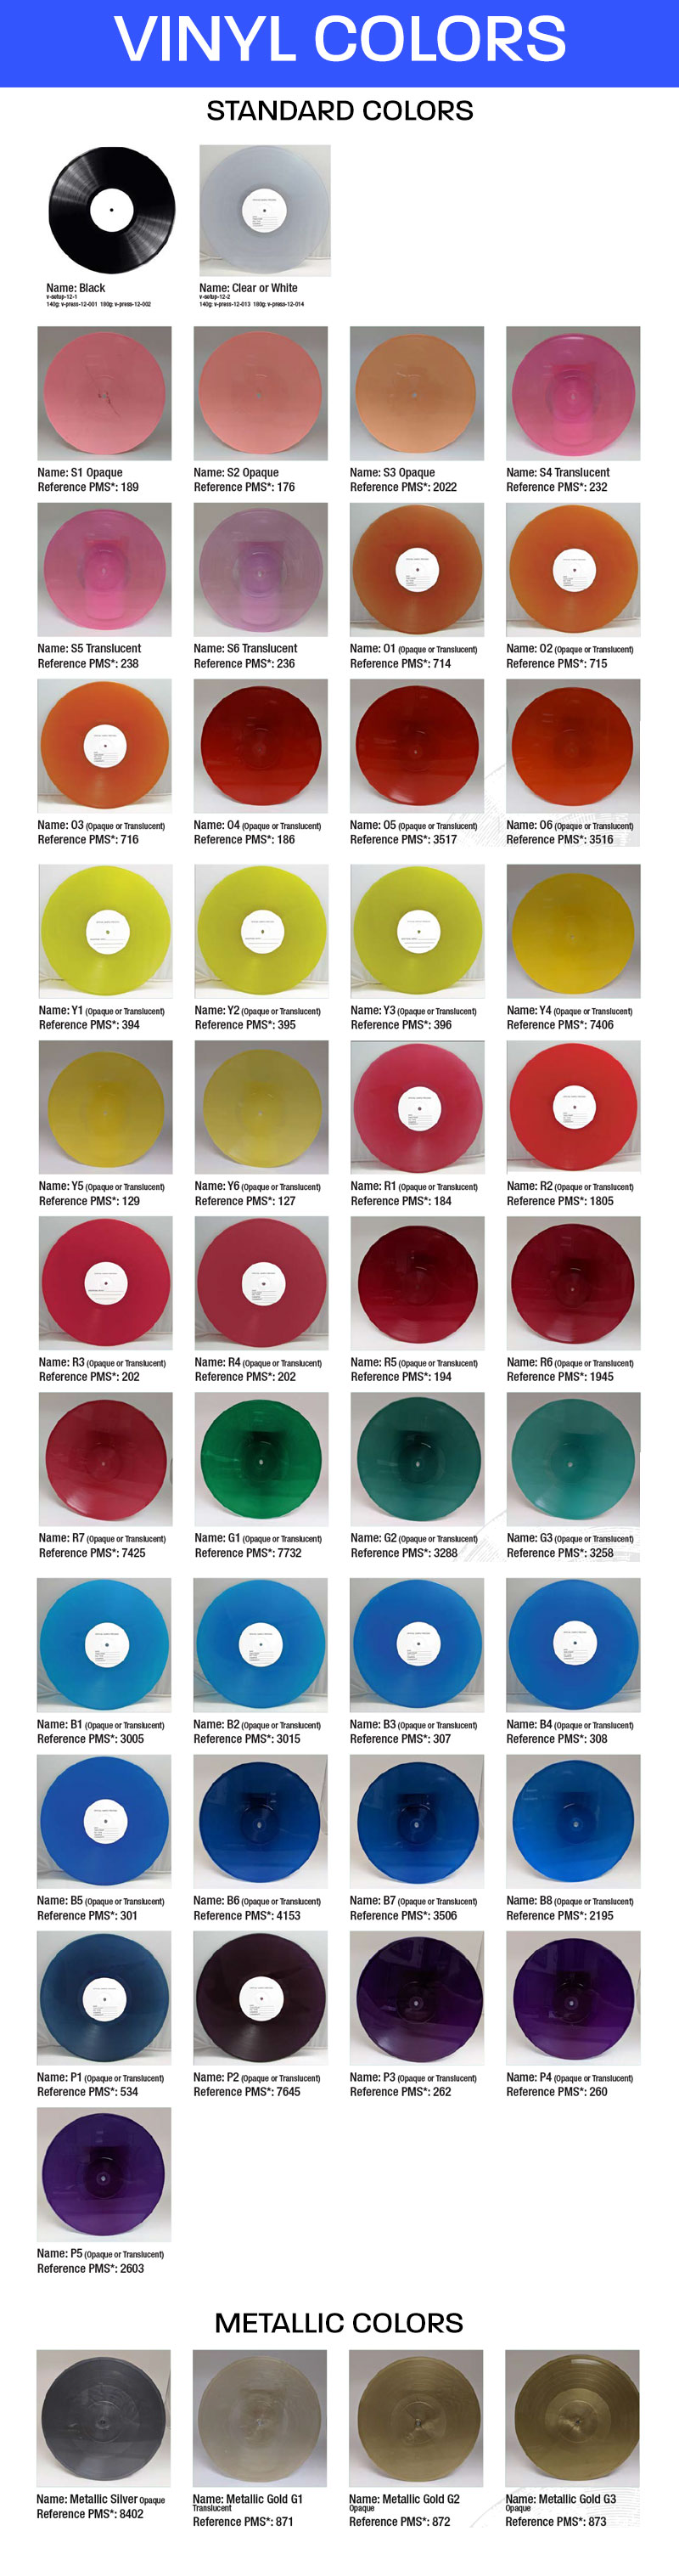 Vinyl colors from Duplication.ca